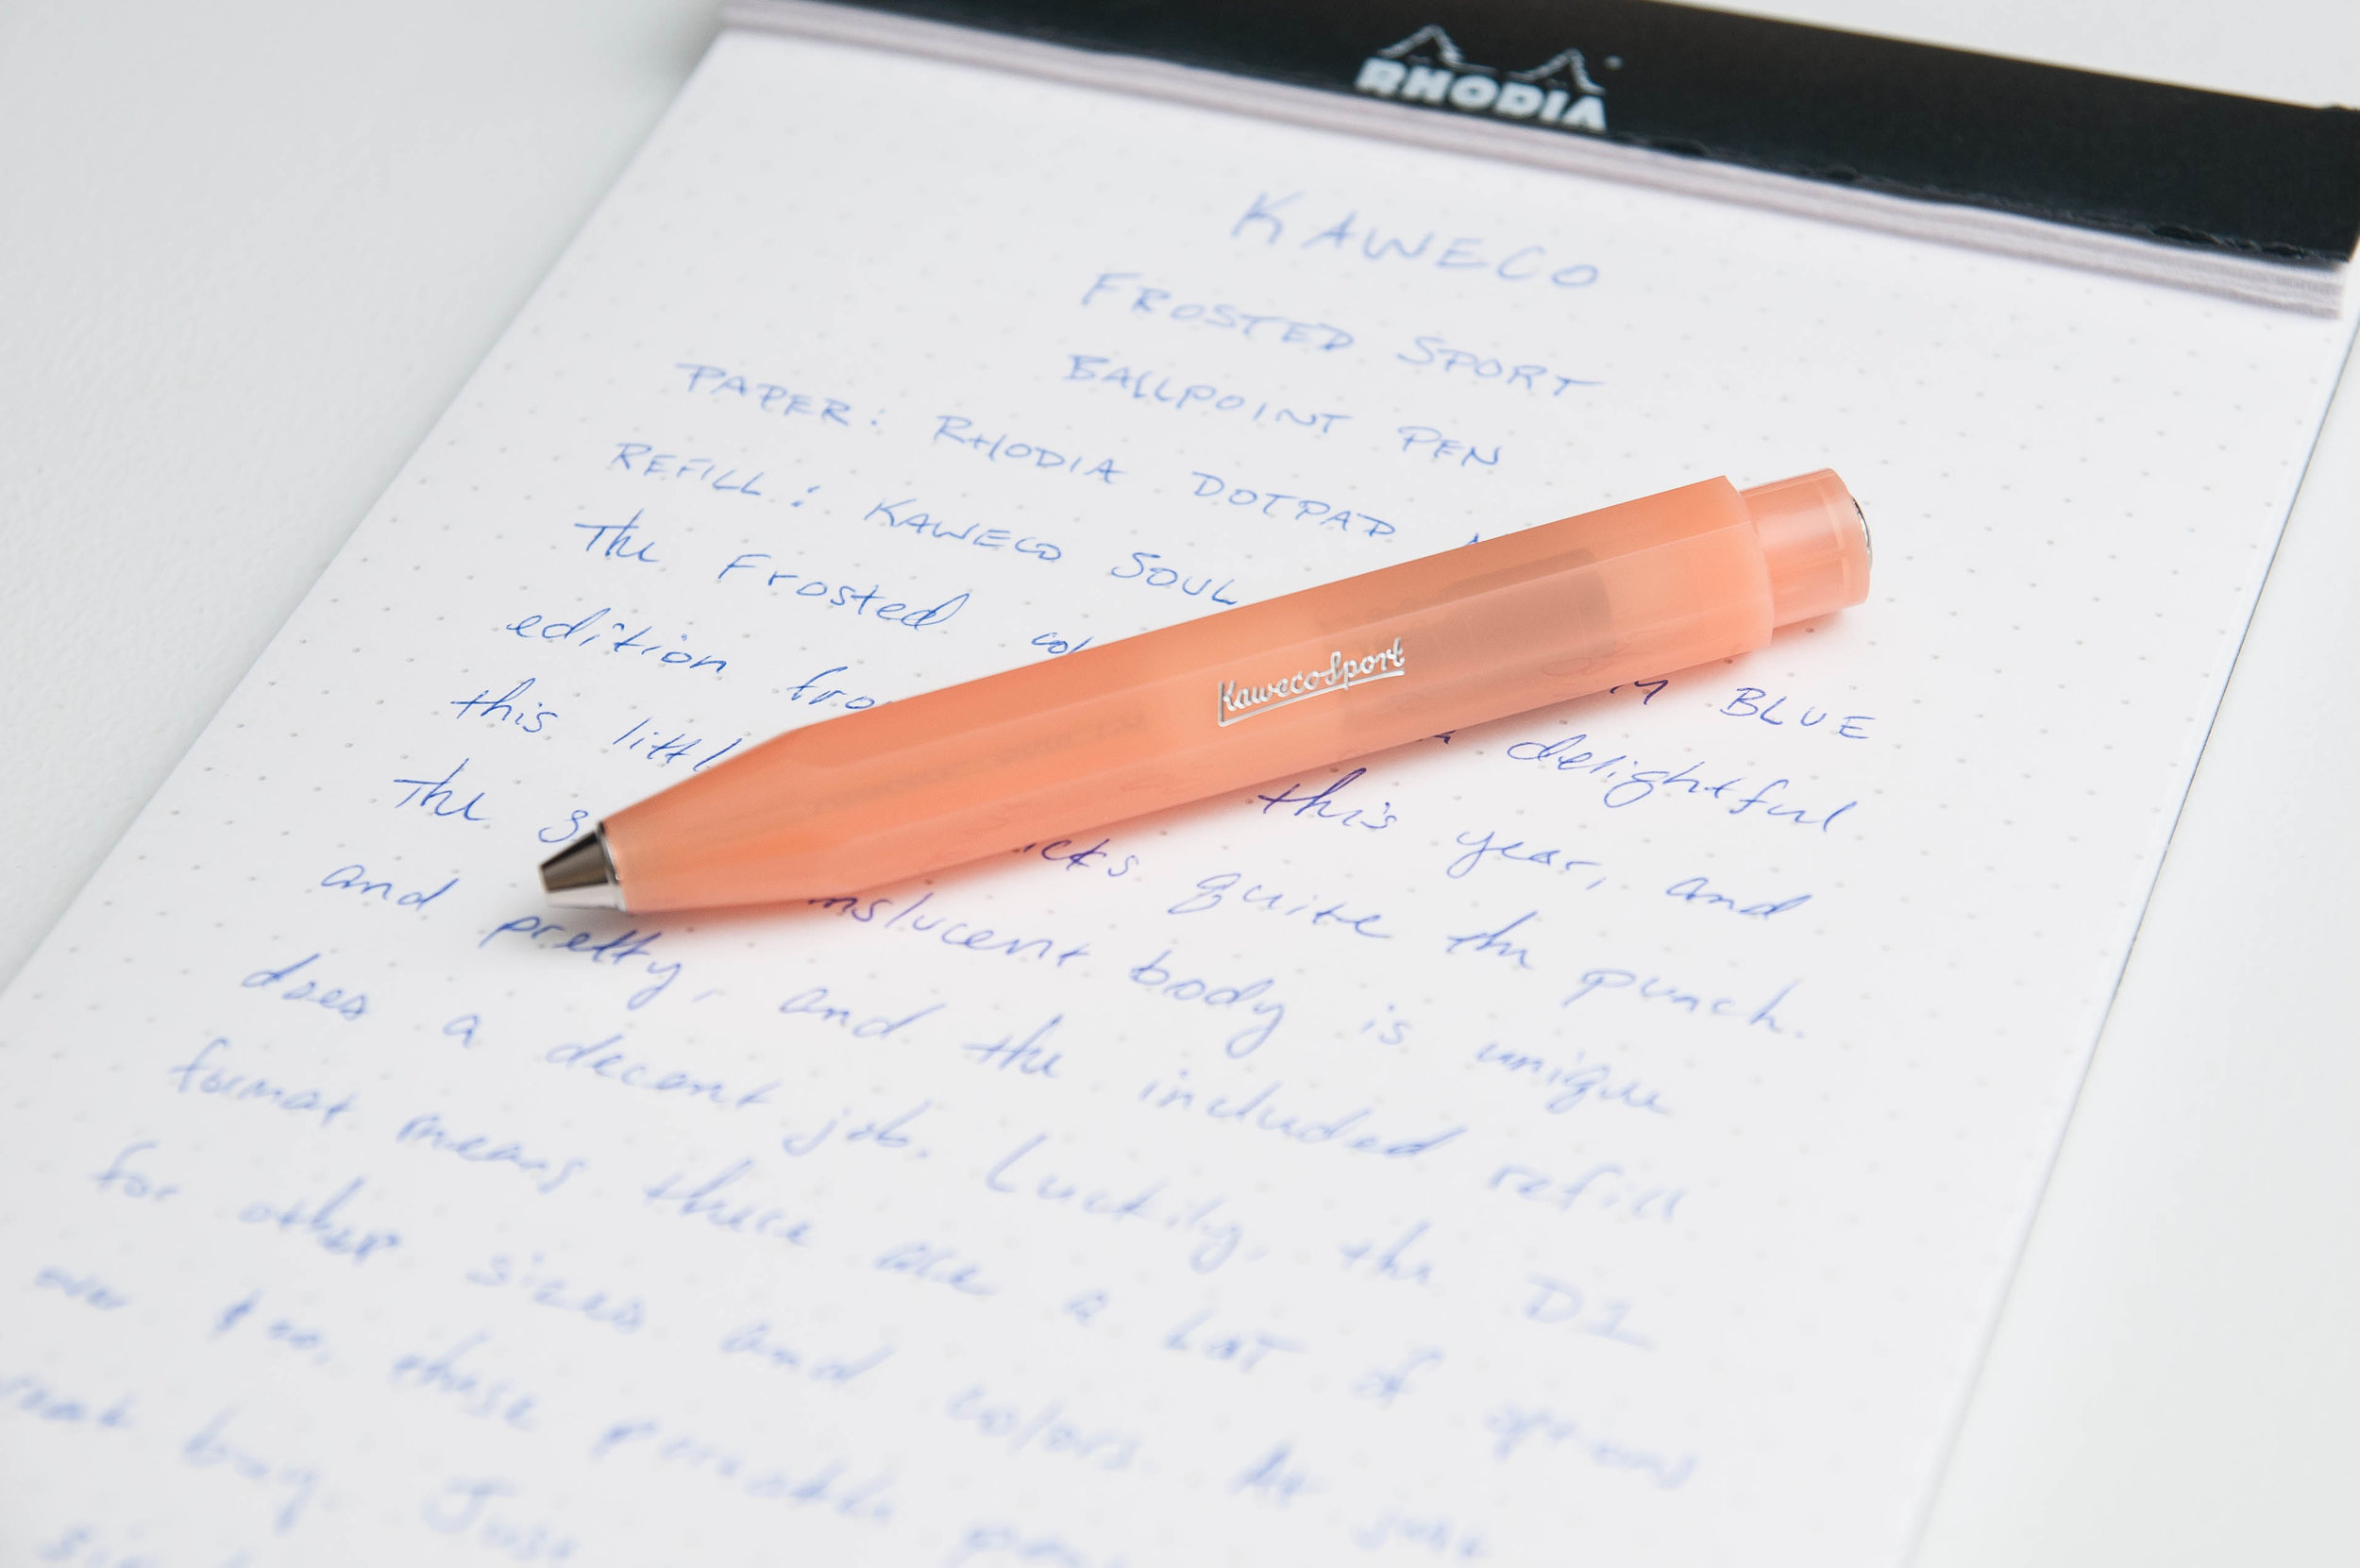 Kaweco Frosted Sport Soft Mandarine Ballpoint Pen Review — The Pen Addict